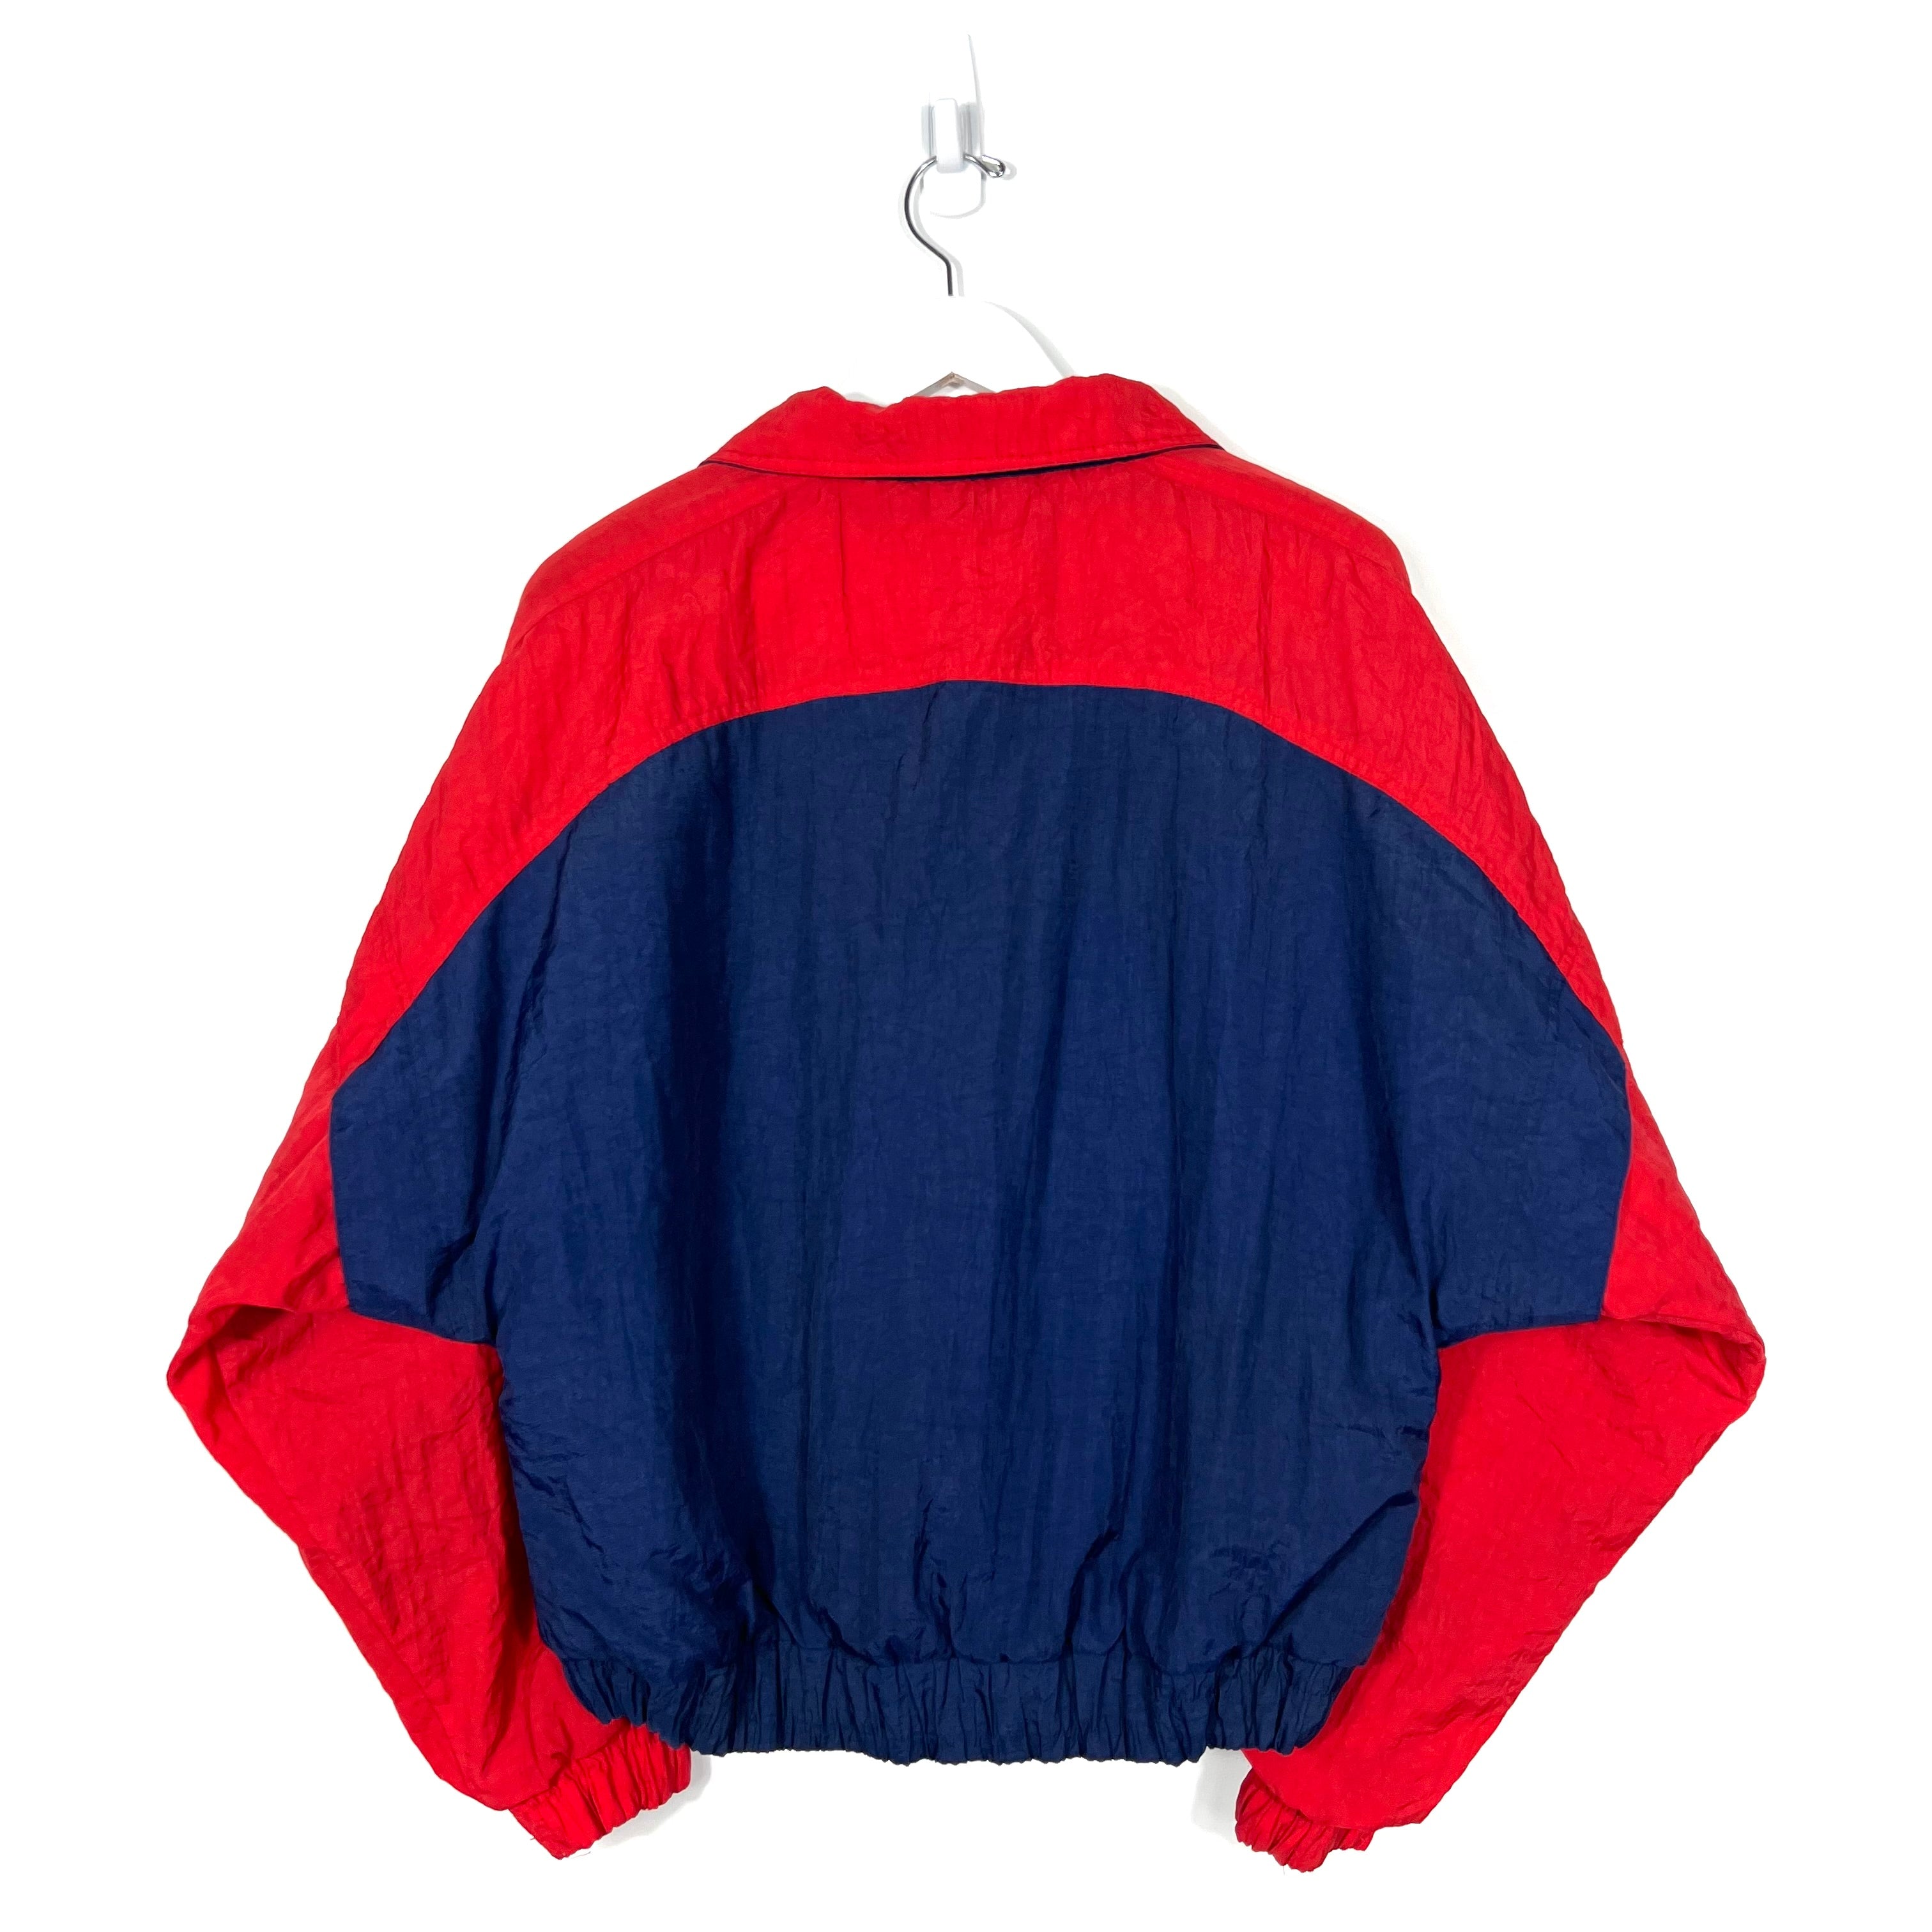 Vintage Champion Insulated Jacket - Women's Small